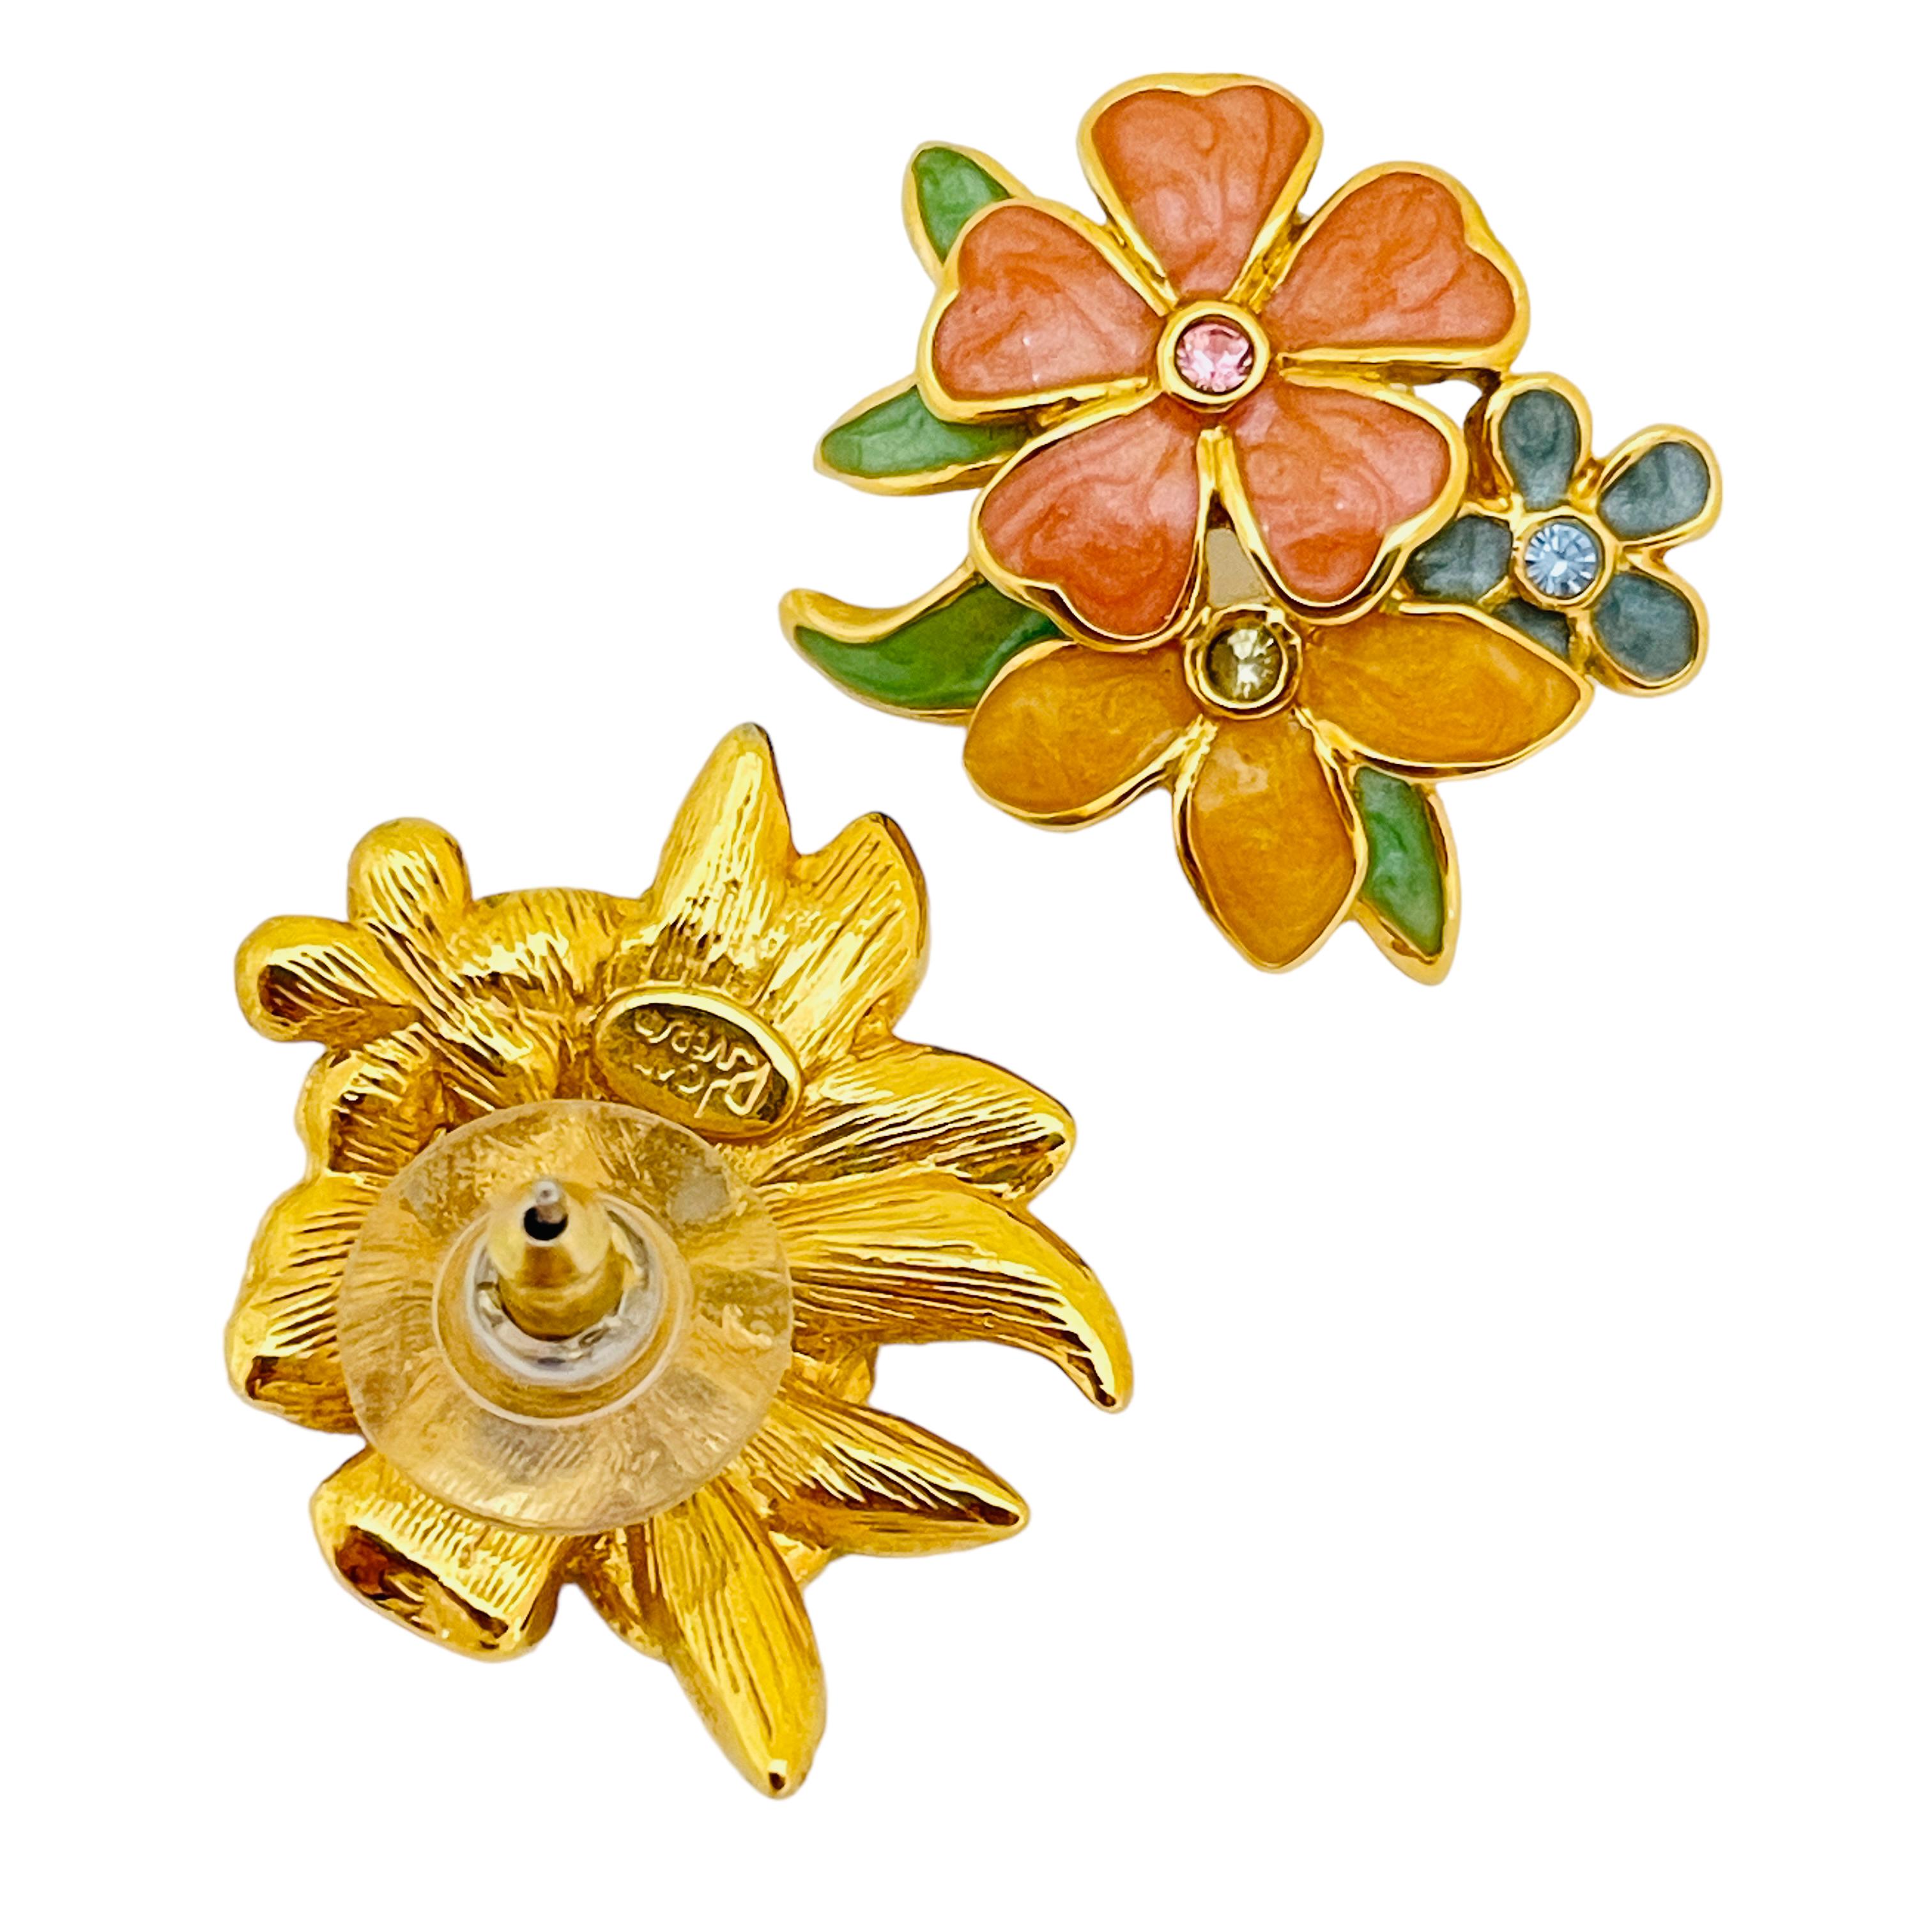 Vintage JON RIVERS flower gold designer runway earrings  In Excellent Condition For Sale In Palos Hills, IL